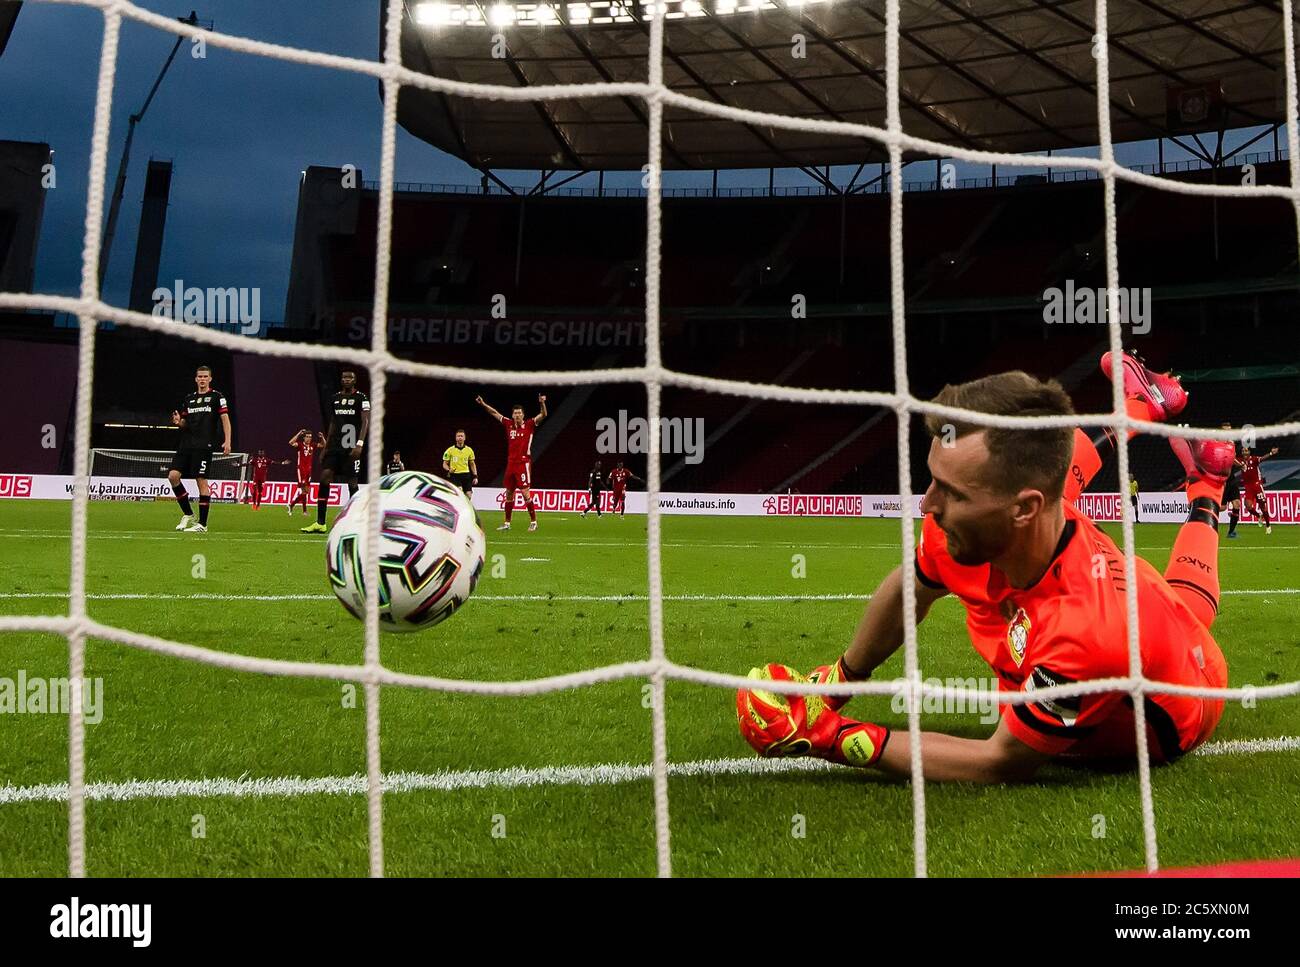 Berlin, Germany, 4 th July 2020,  Robert LEWANDOWSKI, FCB 9   scores, shoots goal for 3-0 after mistake Lukas HRADECKY, Lev 1  at the DFB Pokal Final match  FC BAYERN MUENCHEN - BAYER 04 LEVERKUSEN 4-2  in season 2019/2020 , FCB Foto: © Peter Schatz / Alamy Live News / Kevin Voigt/Jan Huebner/Pool   - DFB REGULATIONS PROHIBIT ANY USE OF PHOTOGRAPHS as IMAGE SEQUENCES and/or QUASI-VIDEO -  National and international News-Agencies OUT Editorial Use ONLY Stock Photo